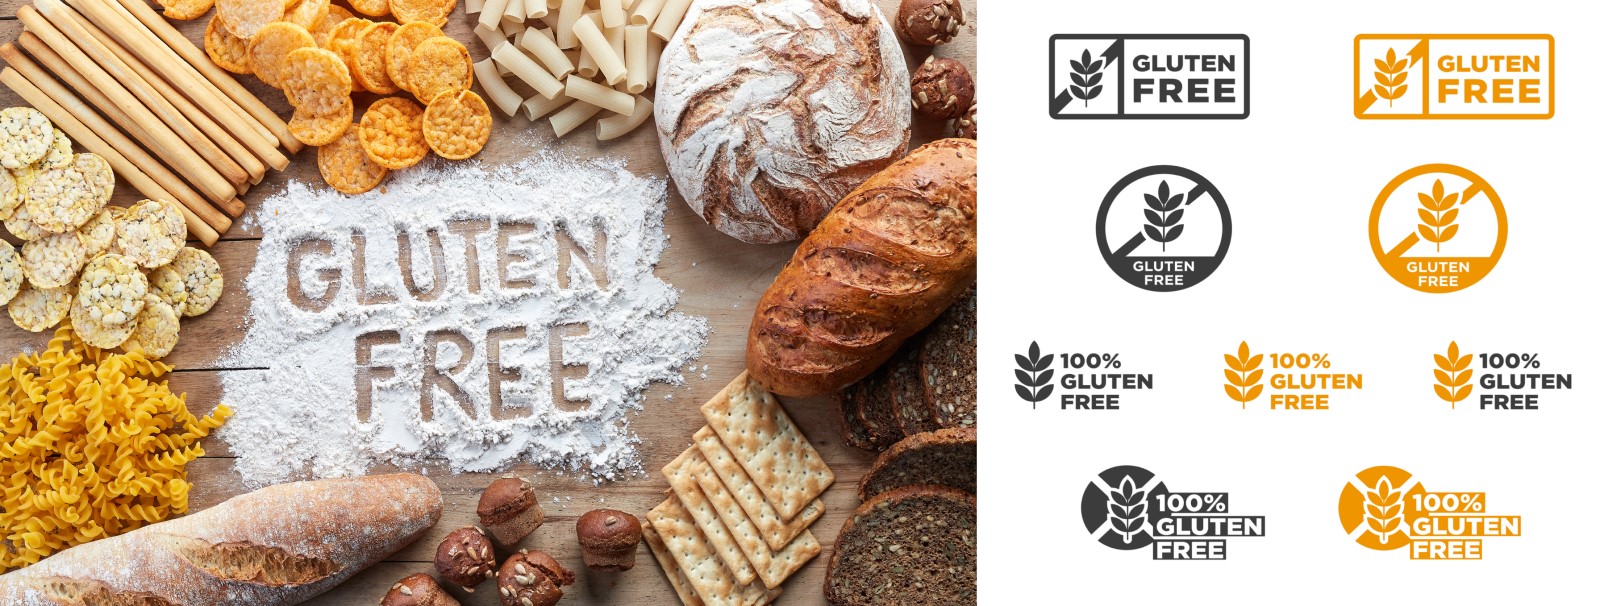 Gluten-free bakery products are labelled.